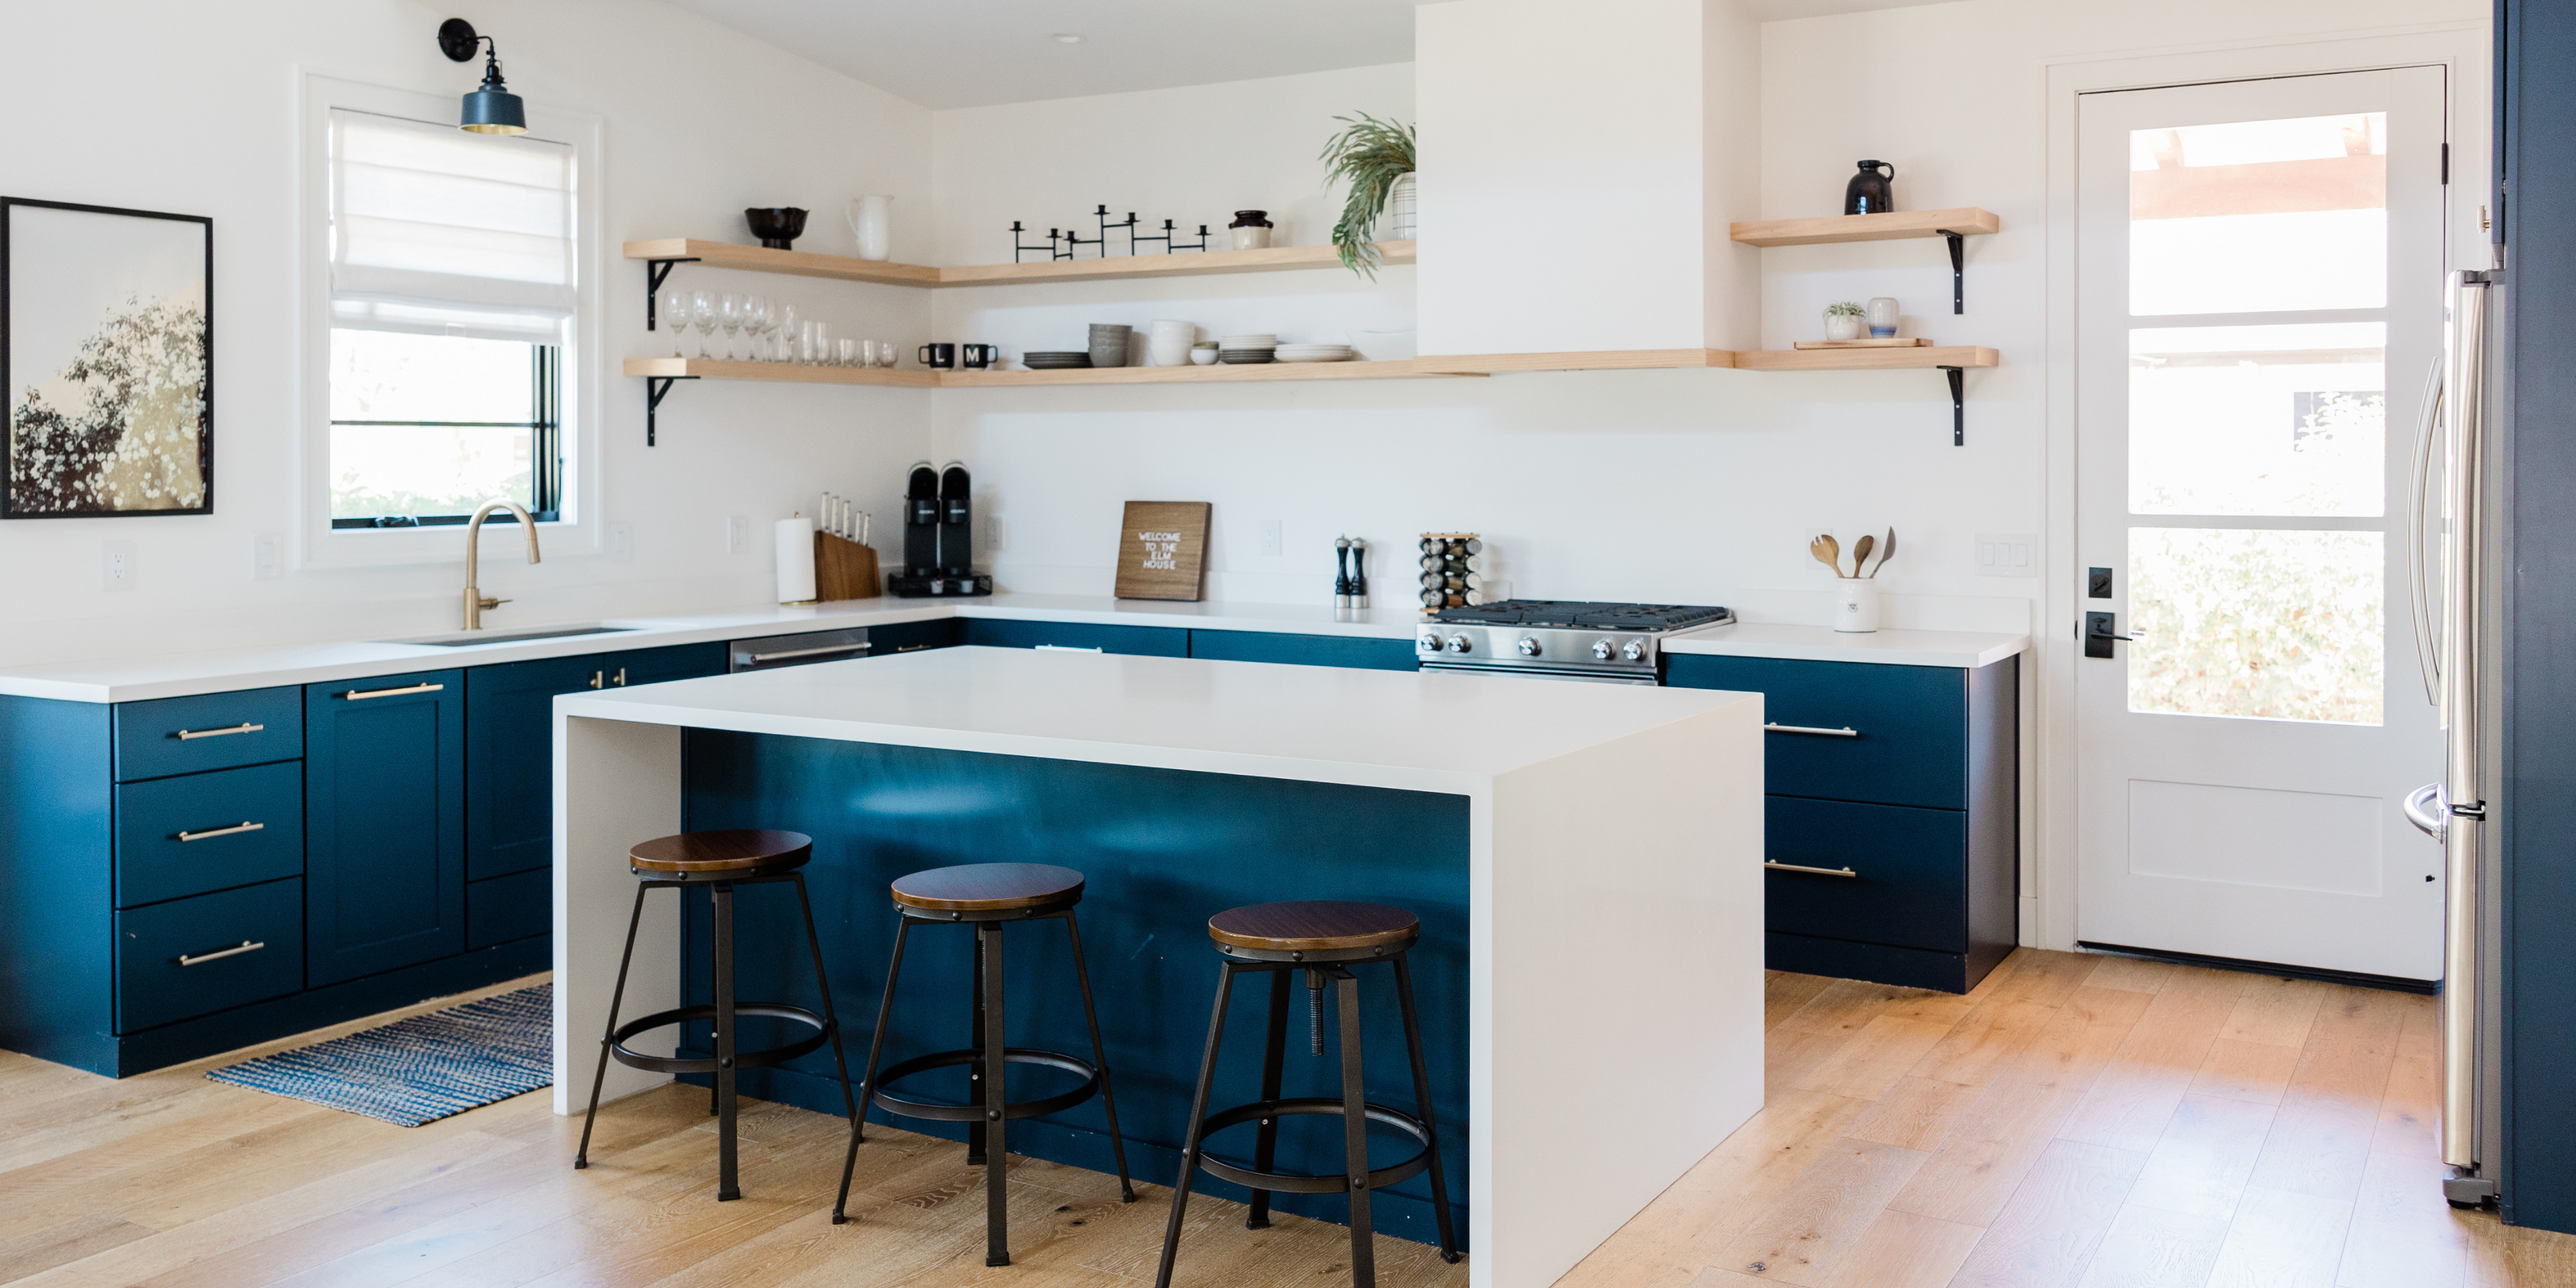 A white and blue kitchen with rustic open shelving.